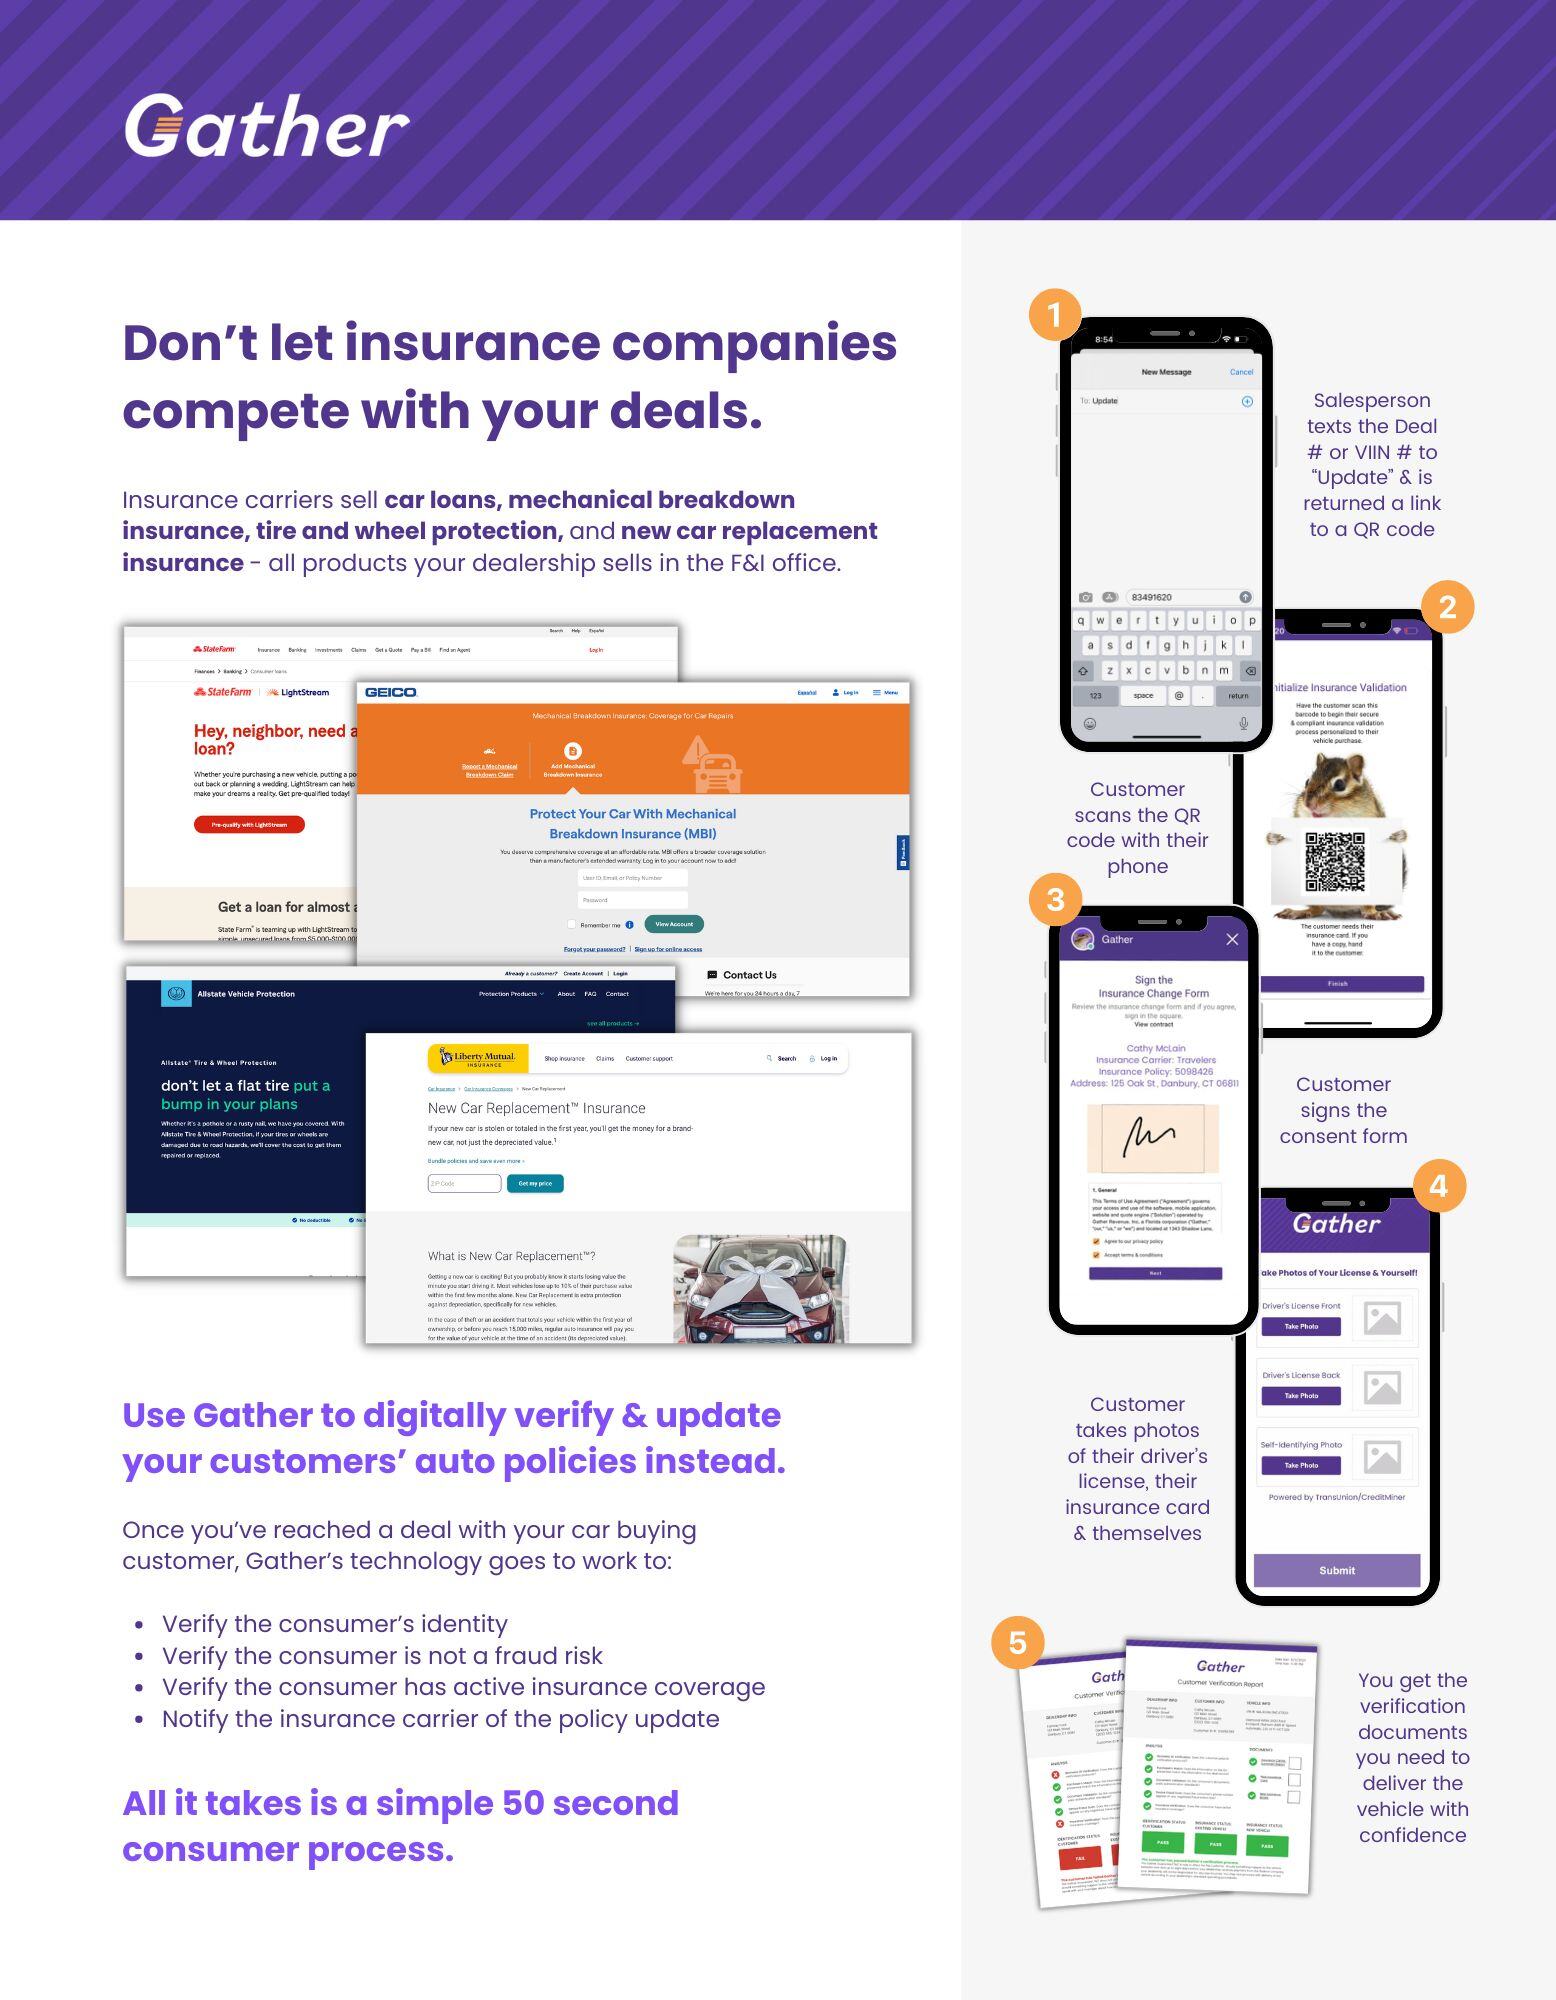 gather-insurance-competes-flyer-jim-5-1-24